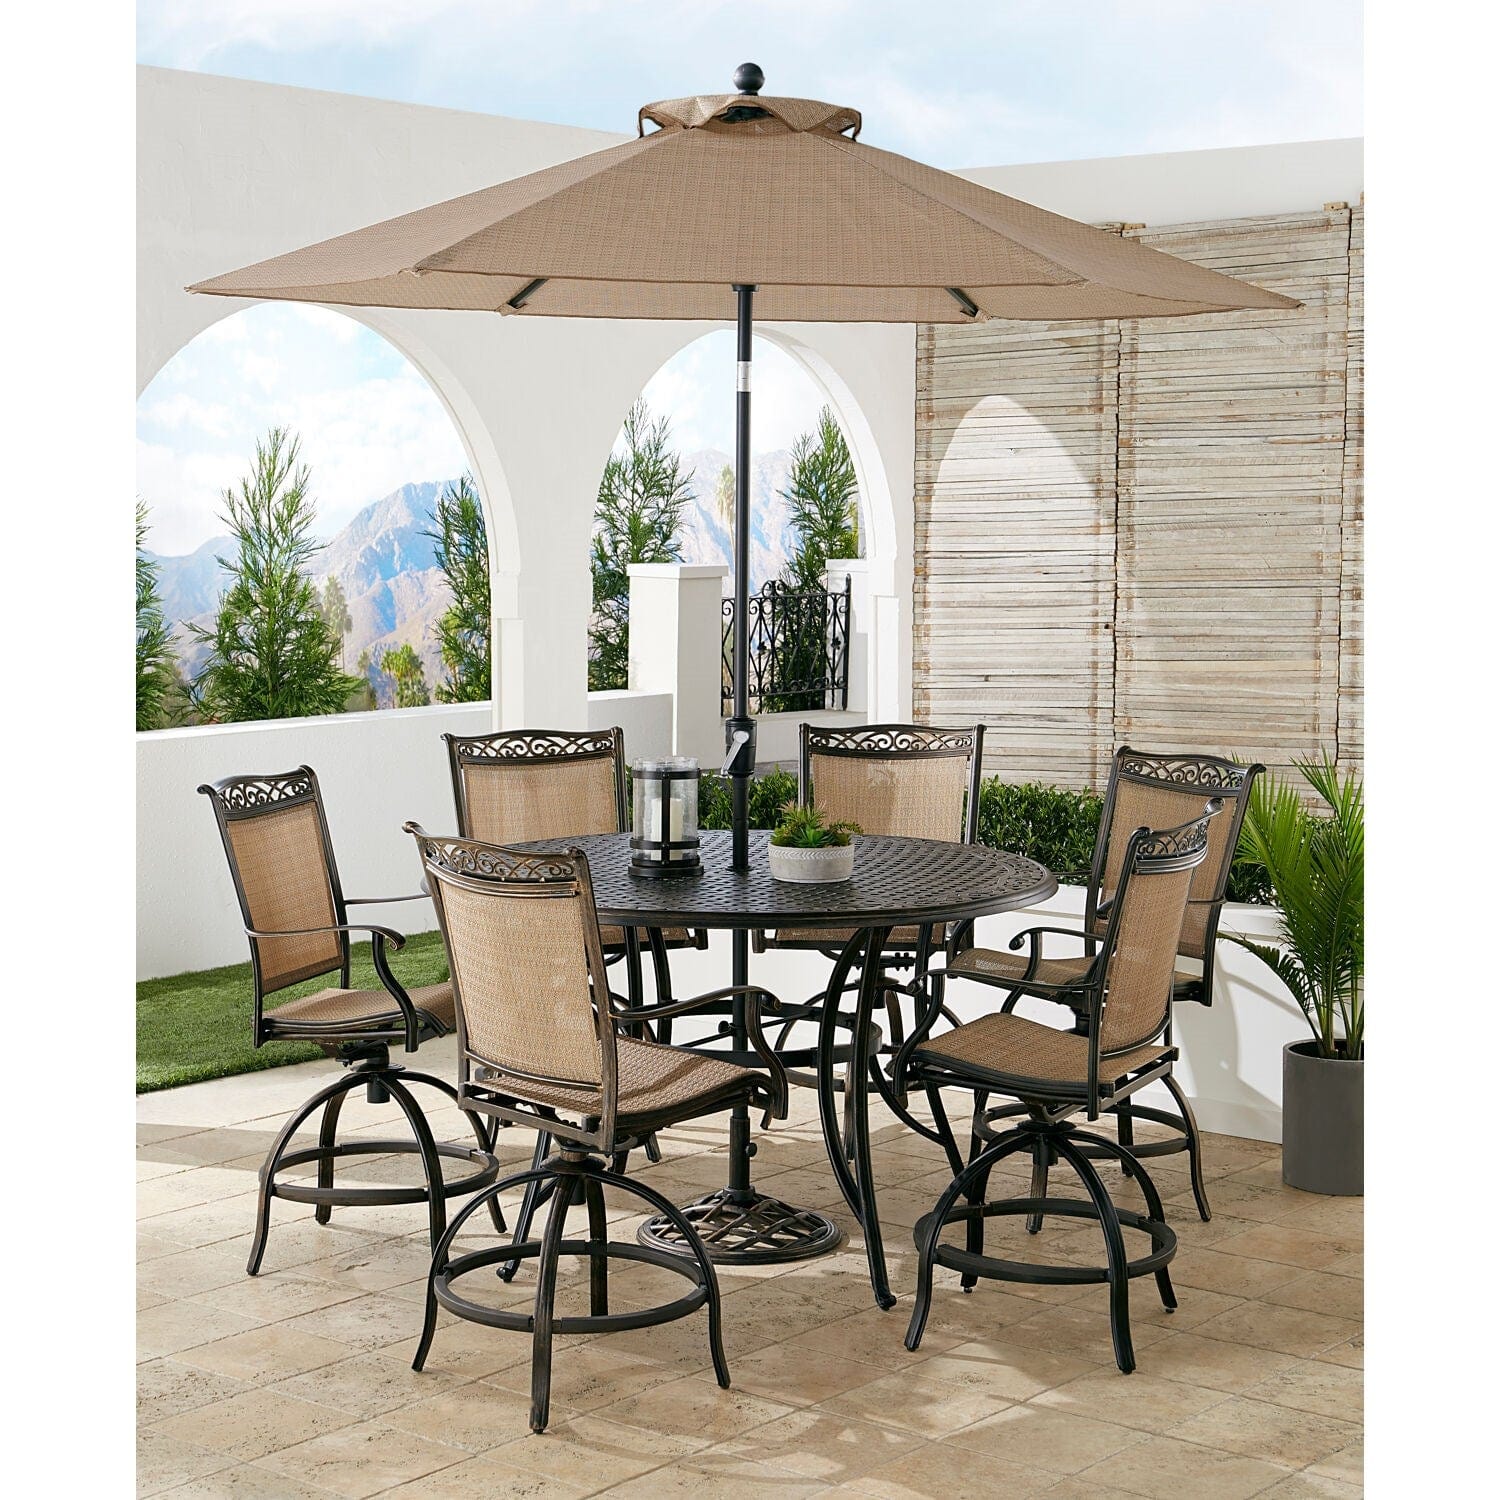 Hanover Outdoor Dining Set Hanover- Fontana 7 Piece High-Dining Set with 6 Counter-Height Swivel Chairs | 56-Inch Cast-Top Table | Umbrella and Umbrella Base | FNTDN7PCPBRC-SU